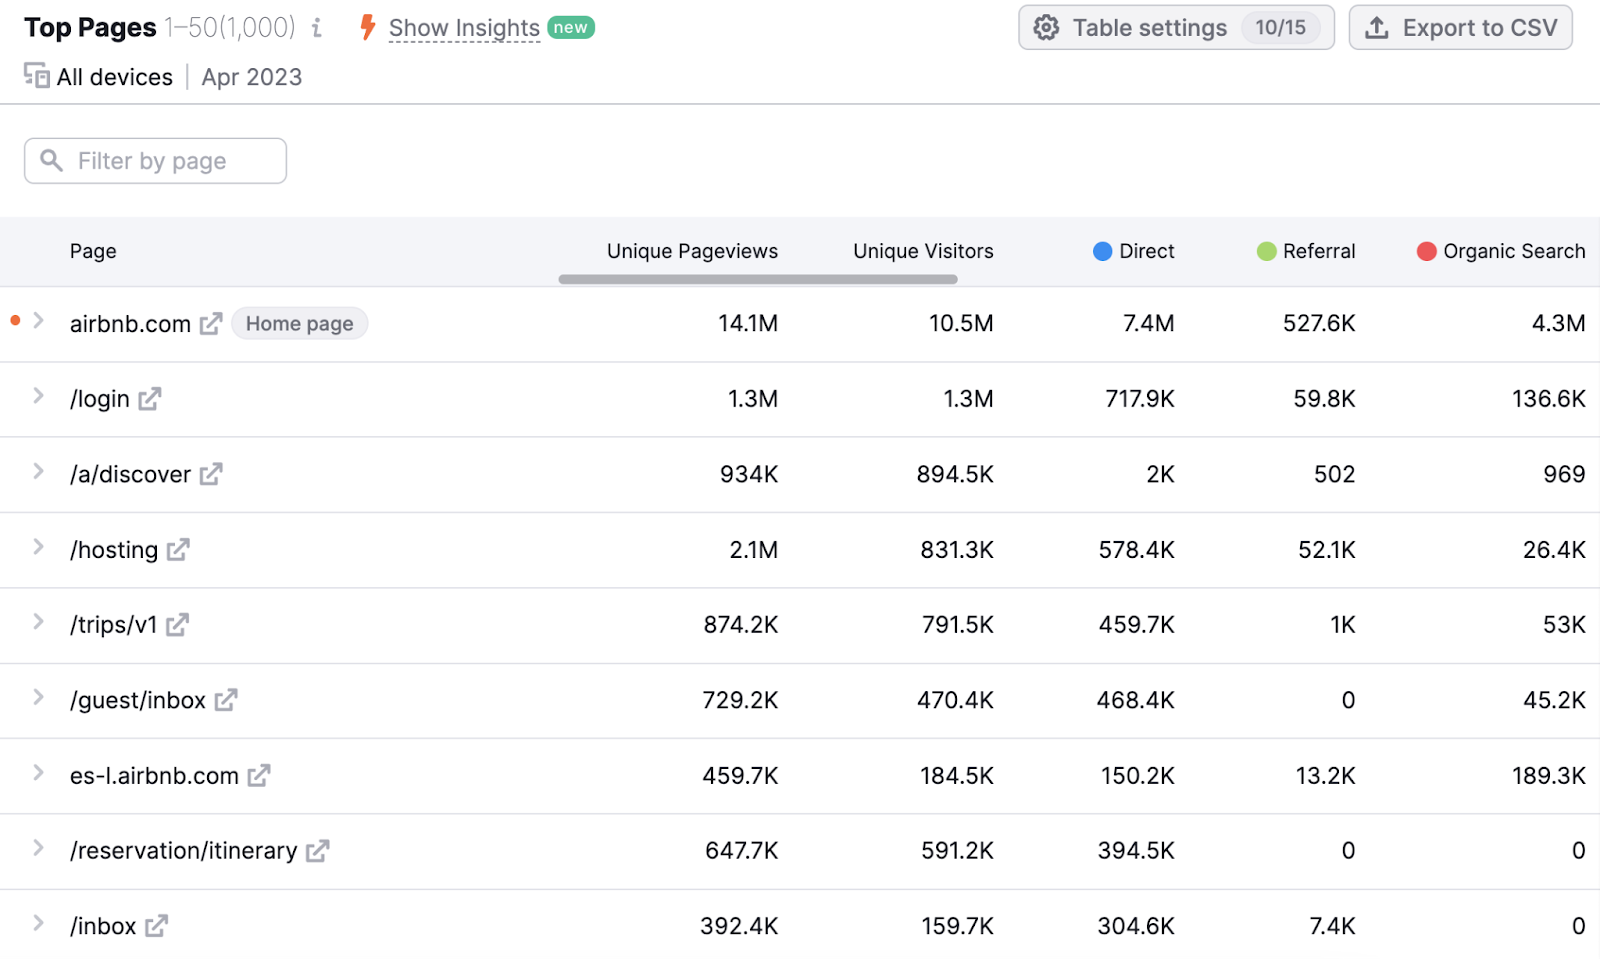 "Top Pages" report shows page views, unique visitors, traffic channels for each page, and a variety of sorting options